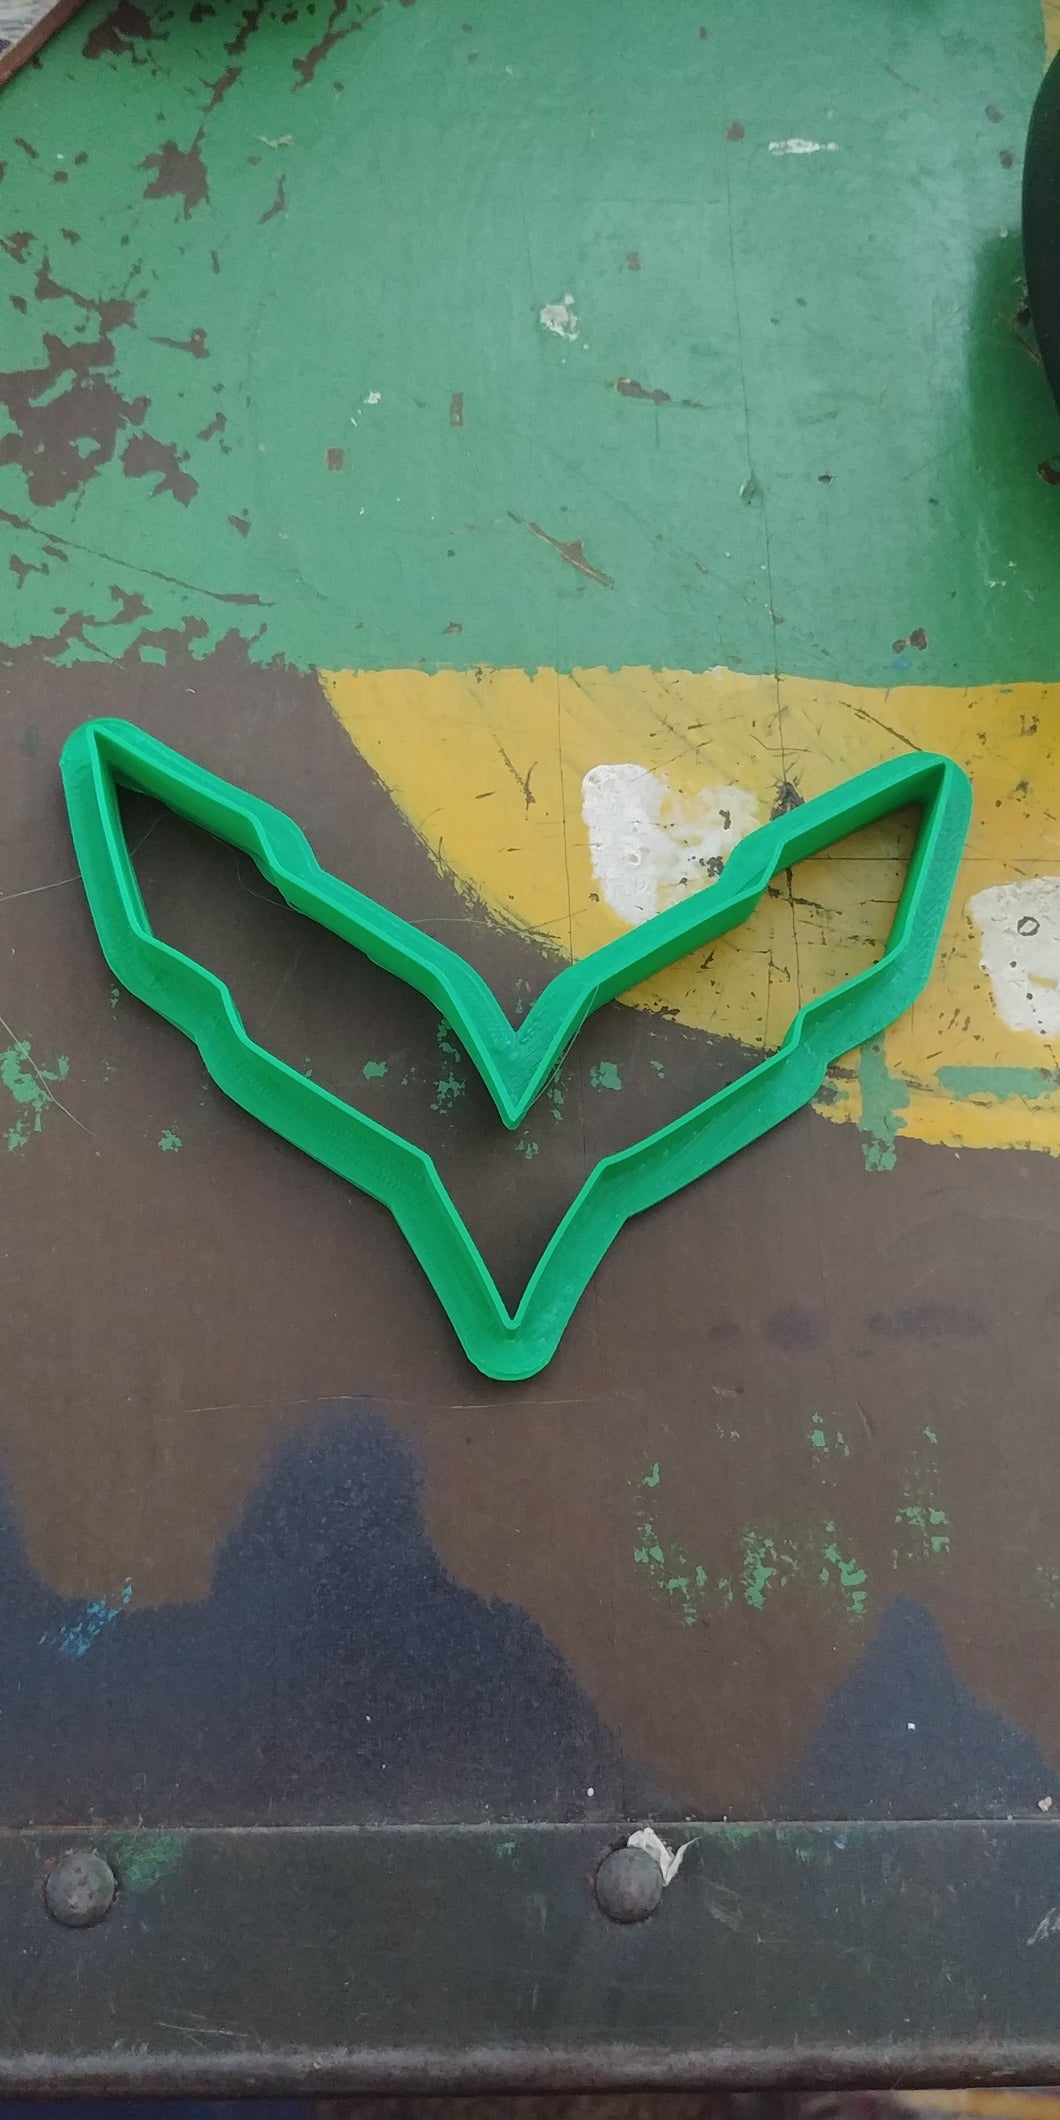 3D Printed Cookie Cutter Inspired by Chevrolet Corvette Flags Emblem